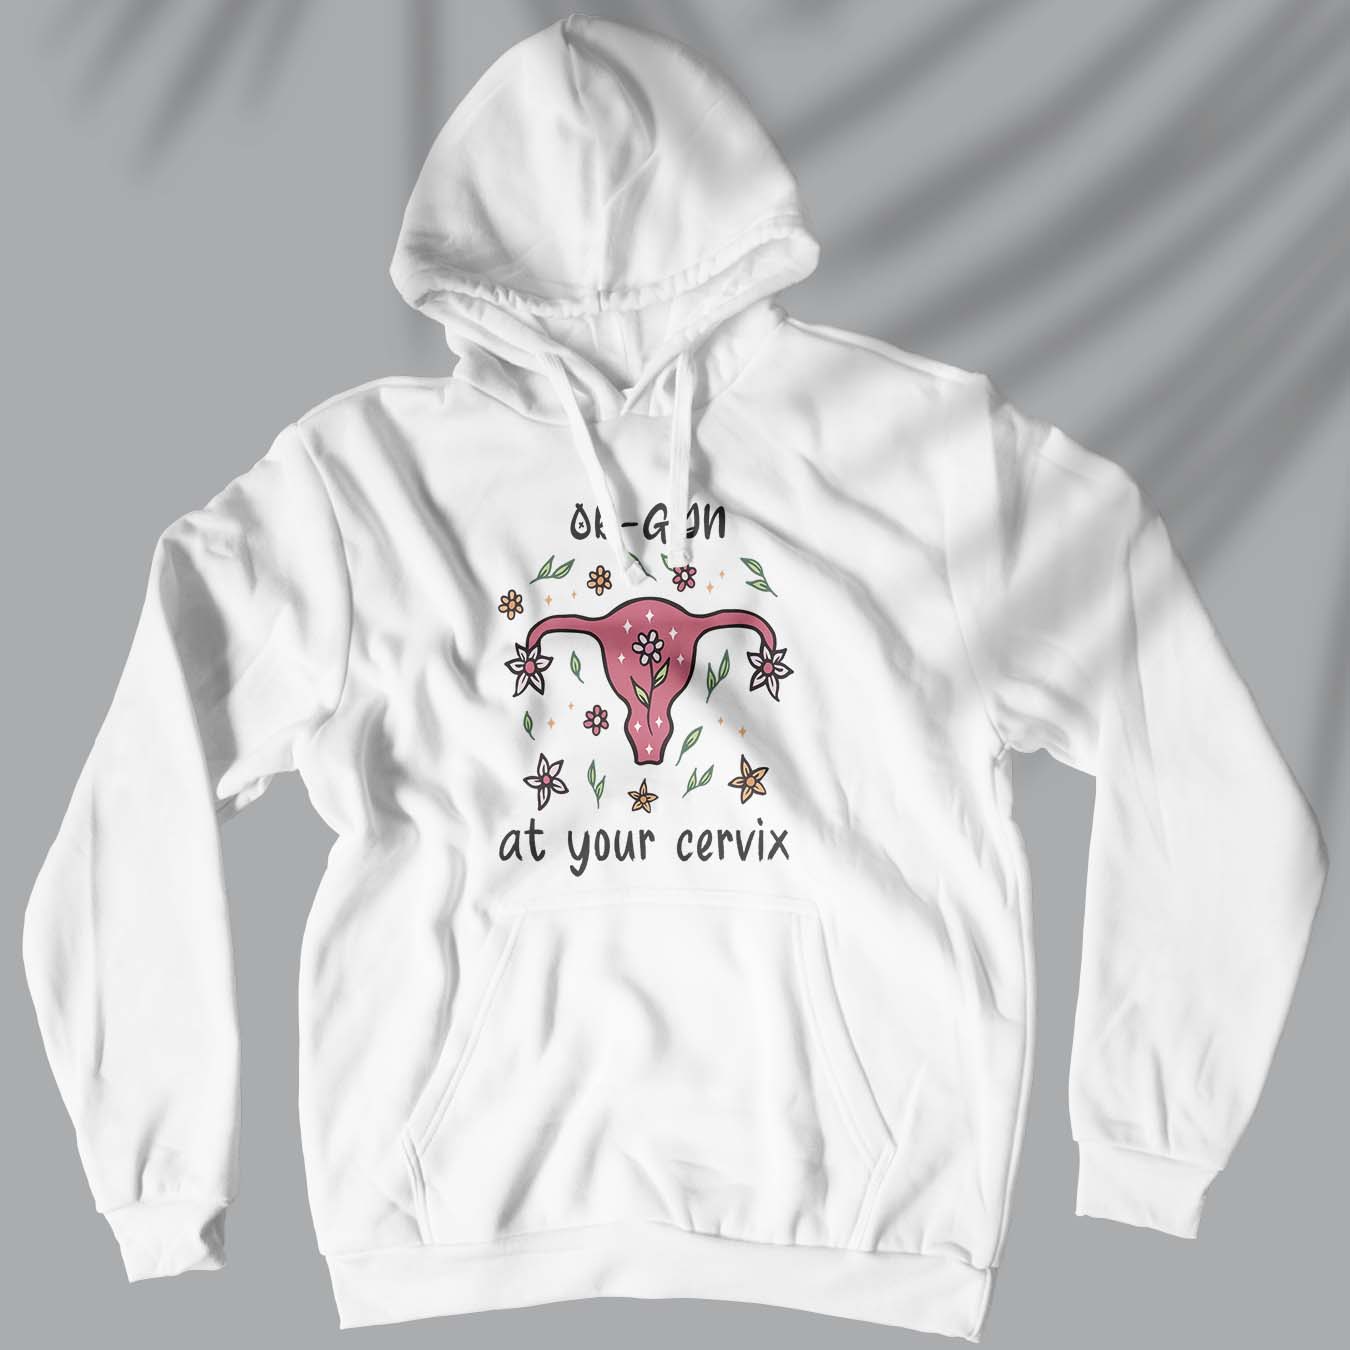 At Your Cervix - Unisex Hoodie For Gynecologists